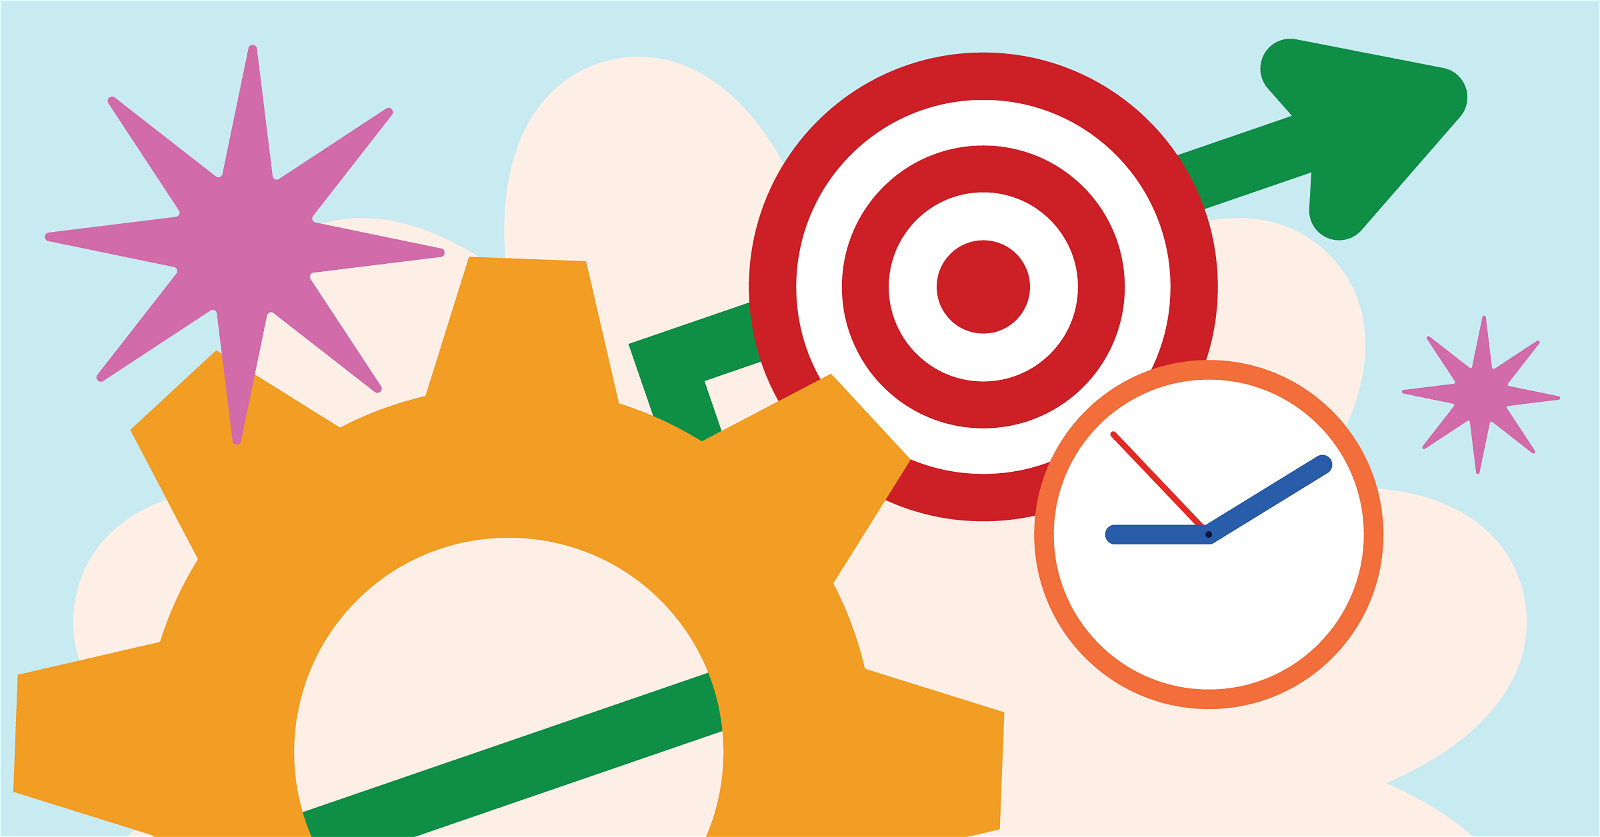 Illustration with a cogwheel, target, arrow, and clock representing mechanisms, goals, progress, and time management.